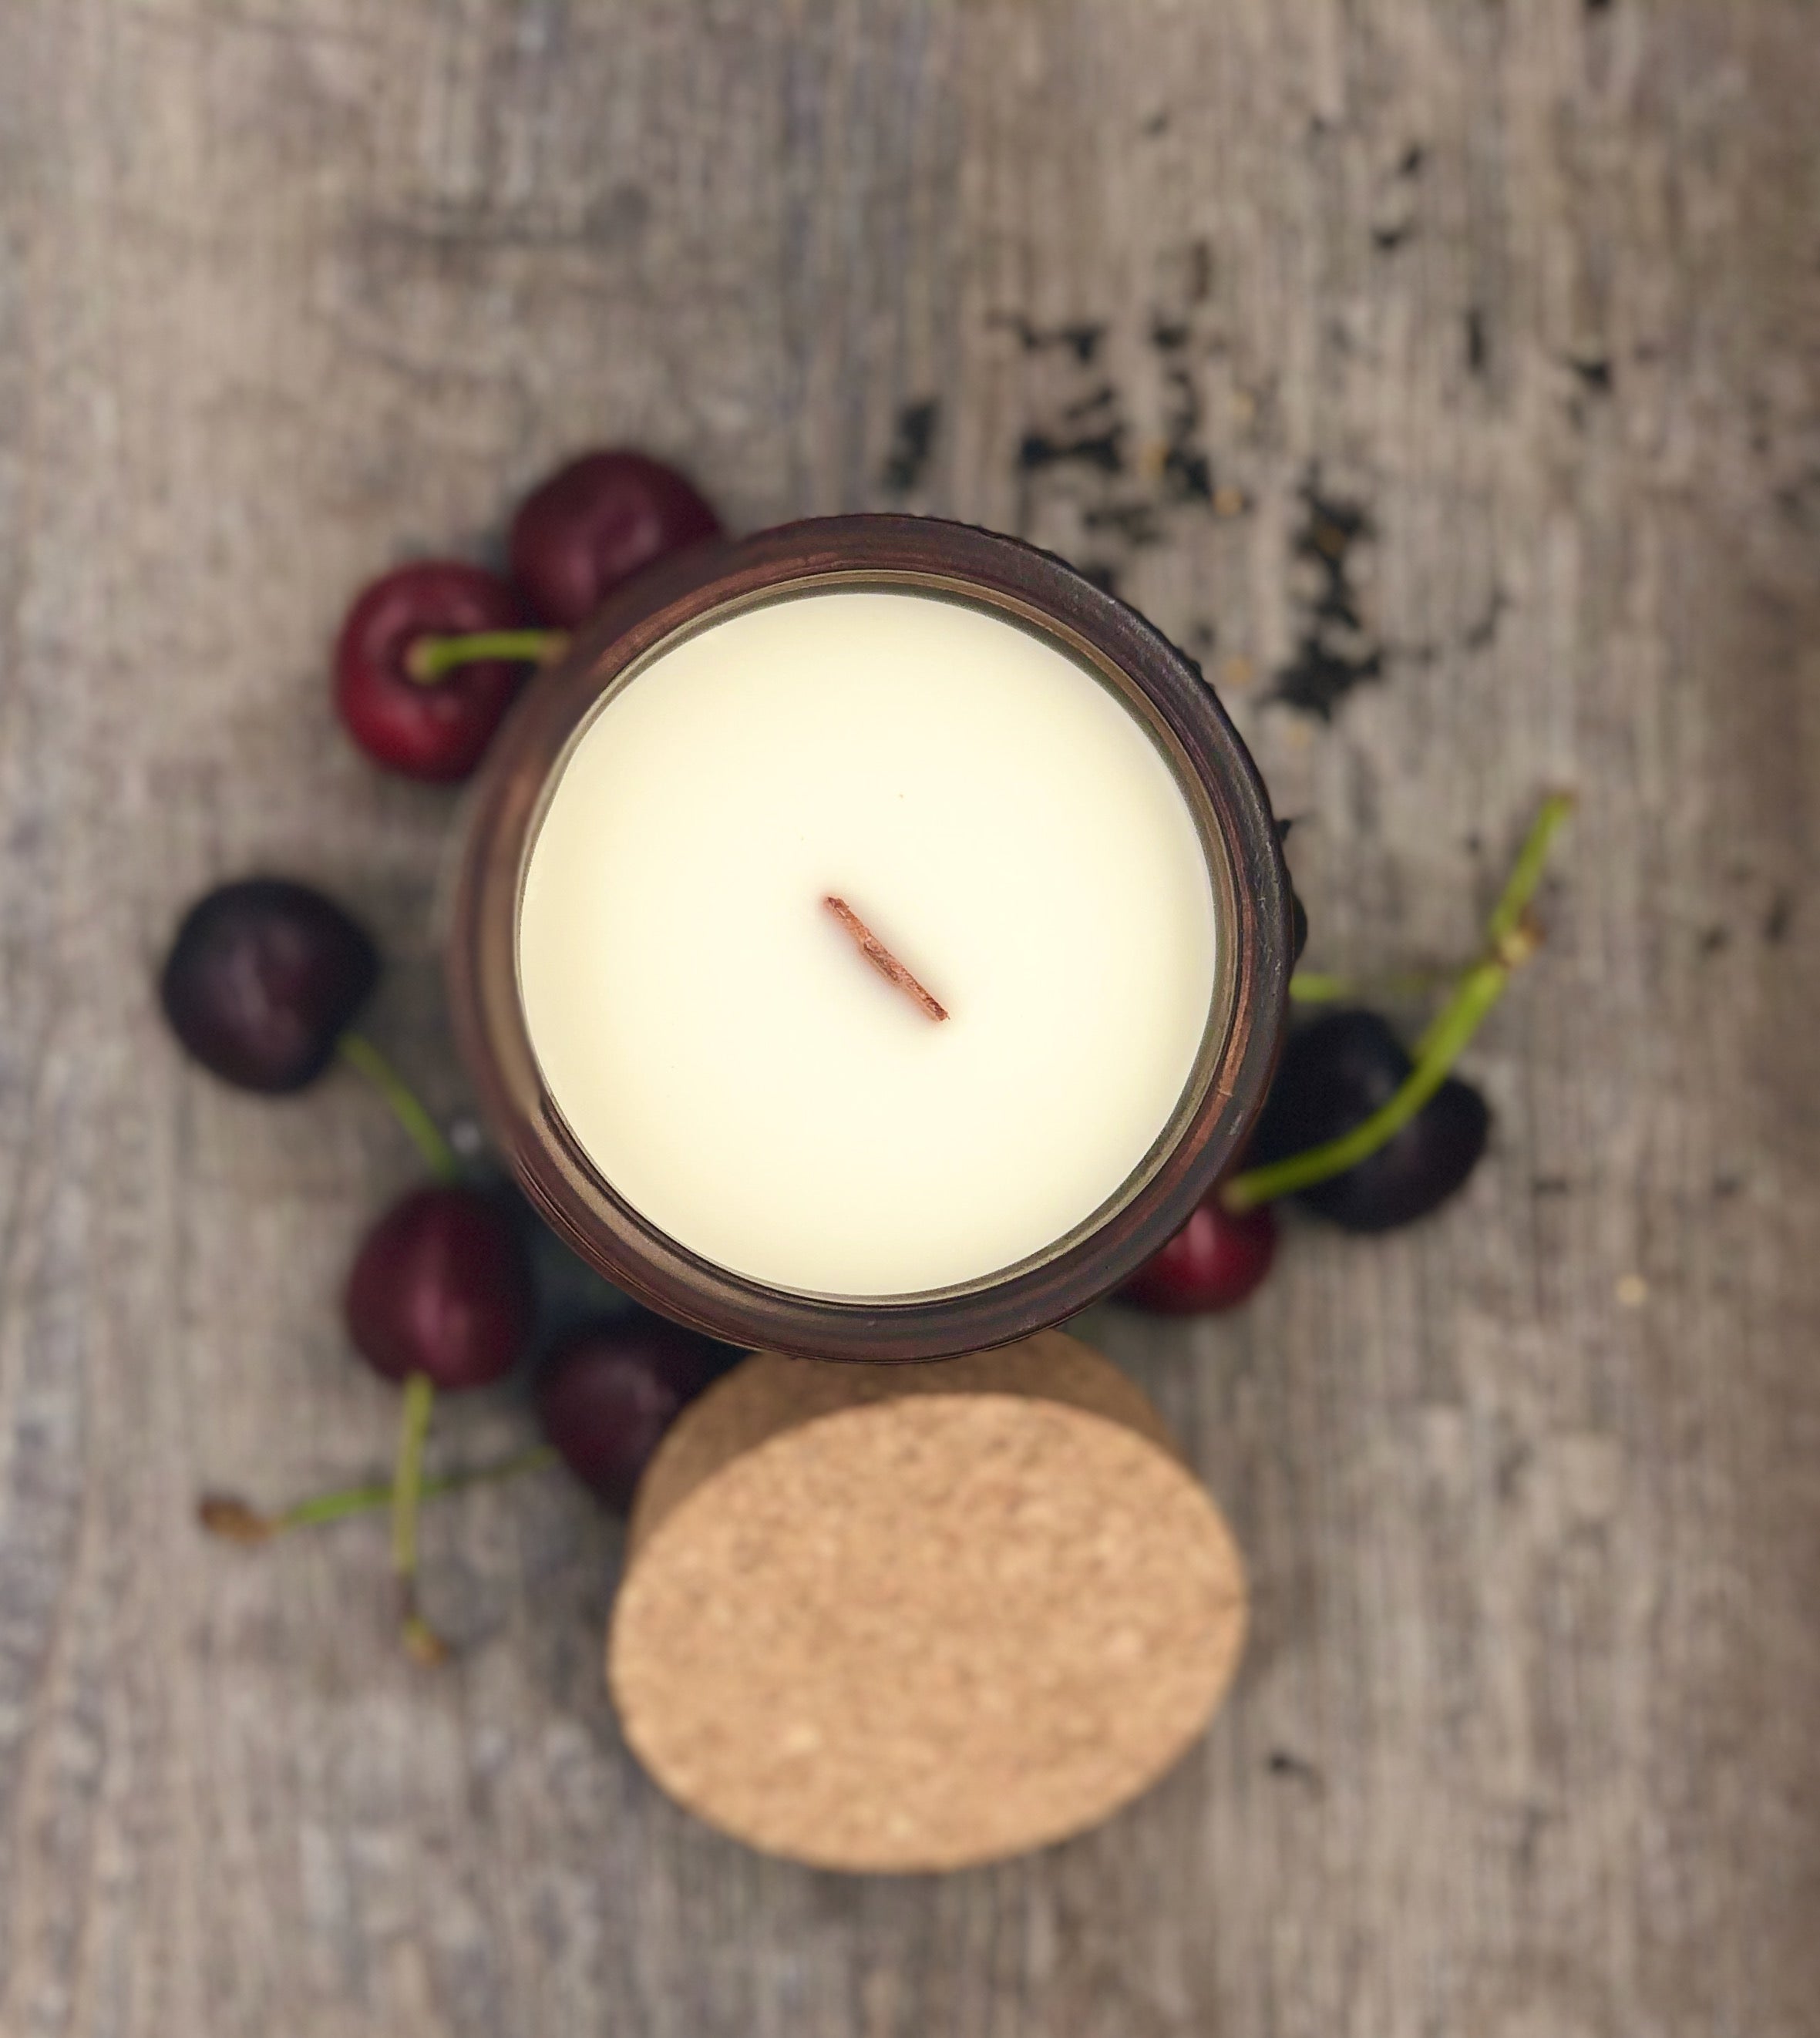 Cherry Pipe Tobacco Scented Soy Candle - Side Hustle Serenity